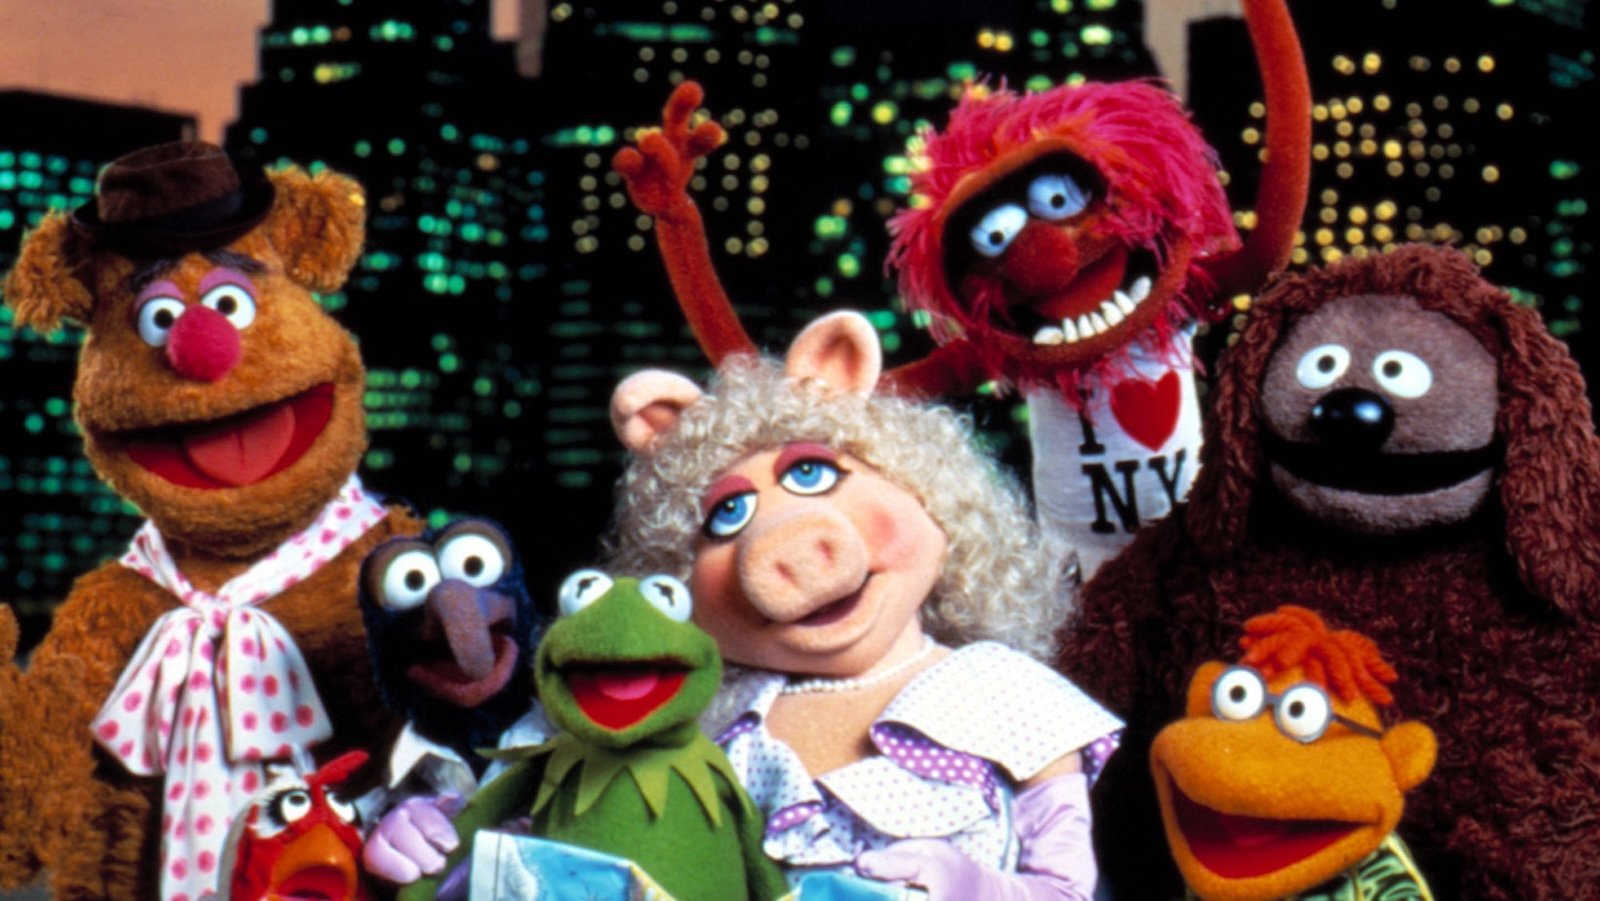 A number of colorful puppets, best known as Muppets, stand in front of a night-time New York City skyline.